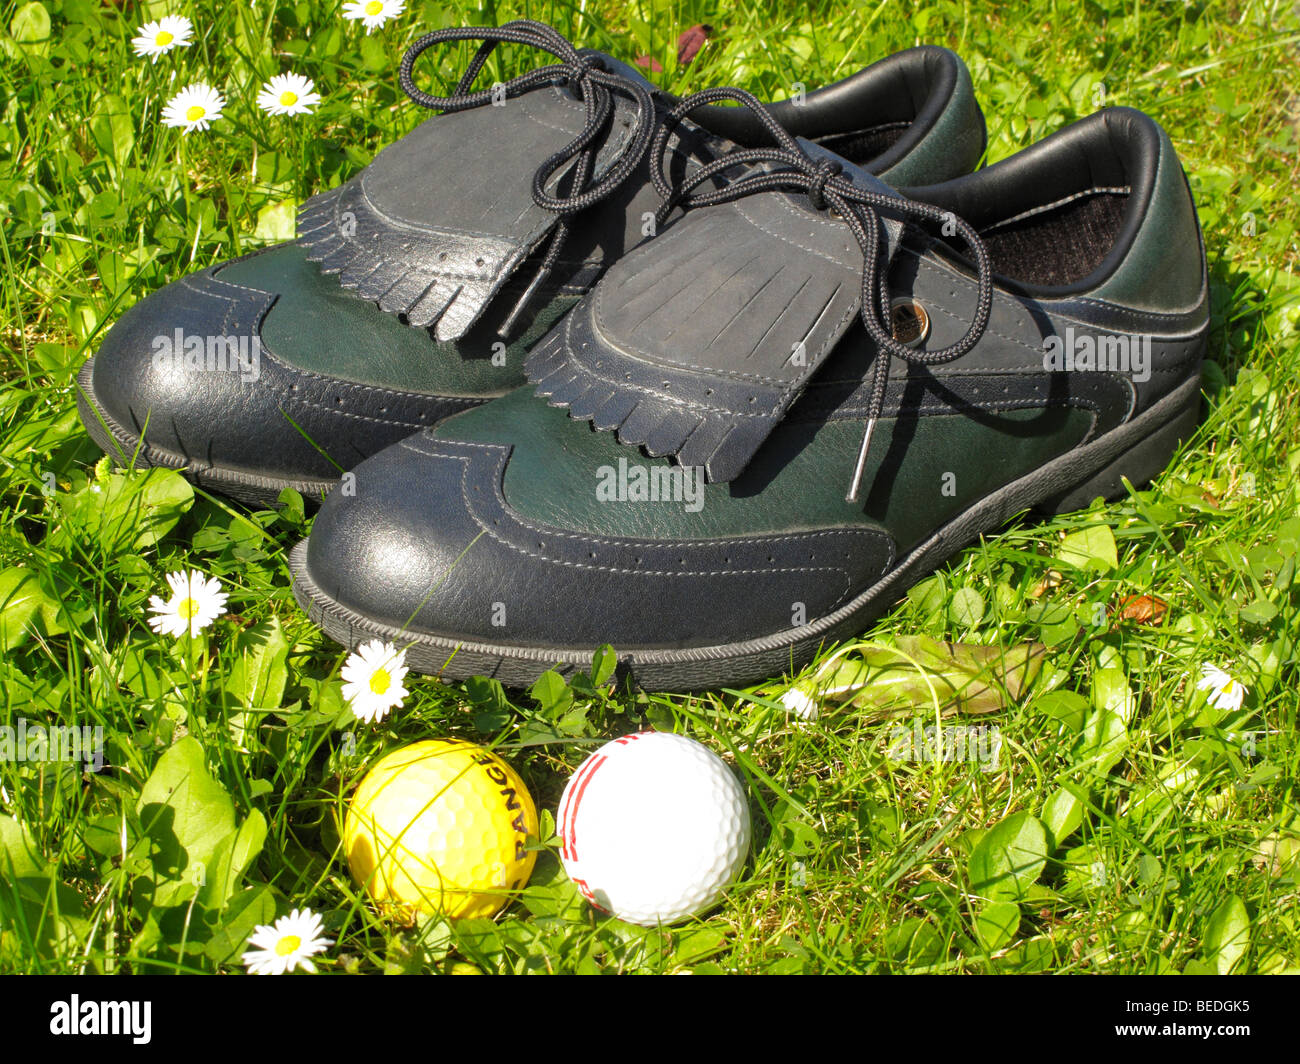 Nuances golf shoes Archives - Page 2 of 3 - Handmade Custom Classic Golf  Shoes